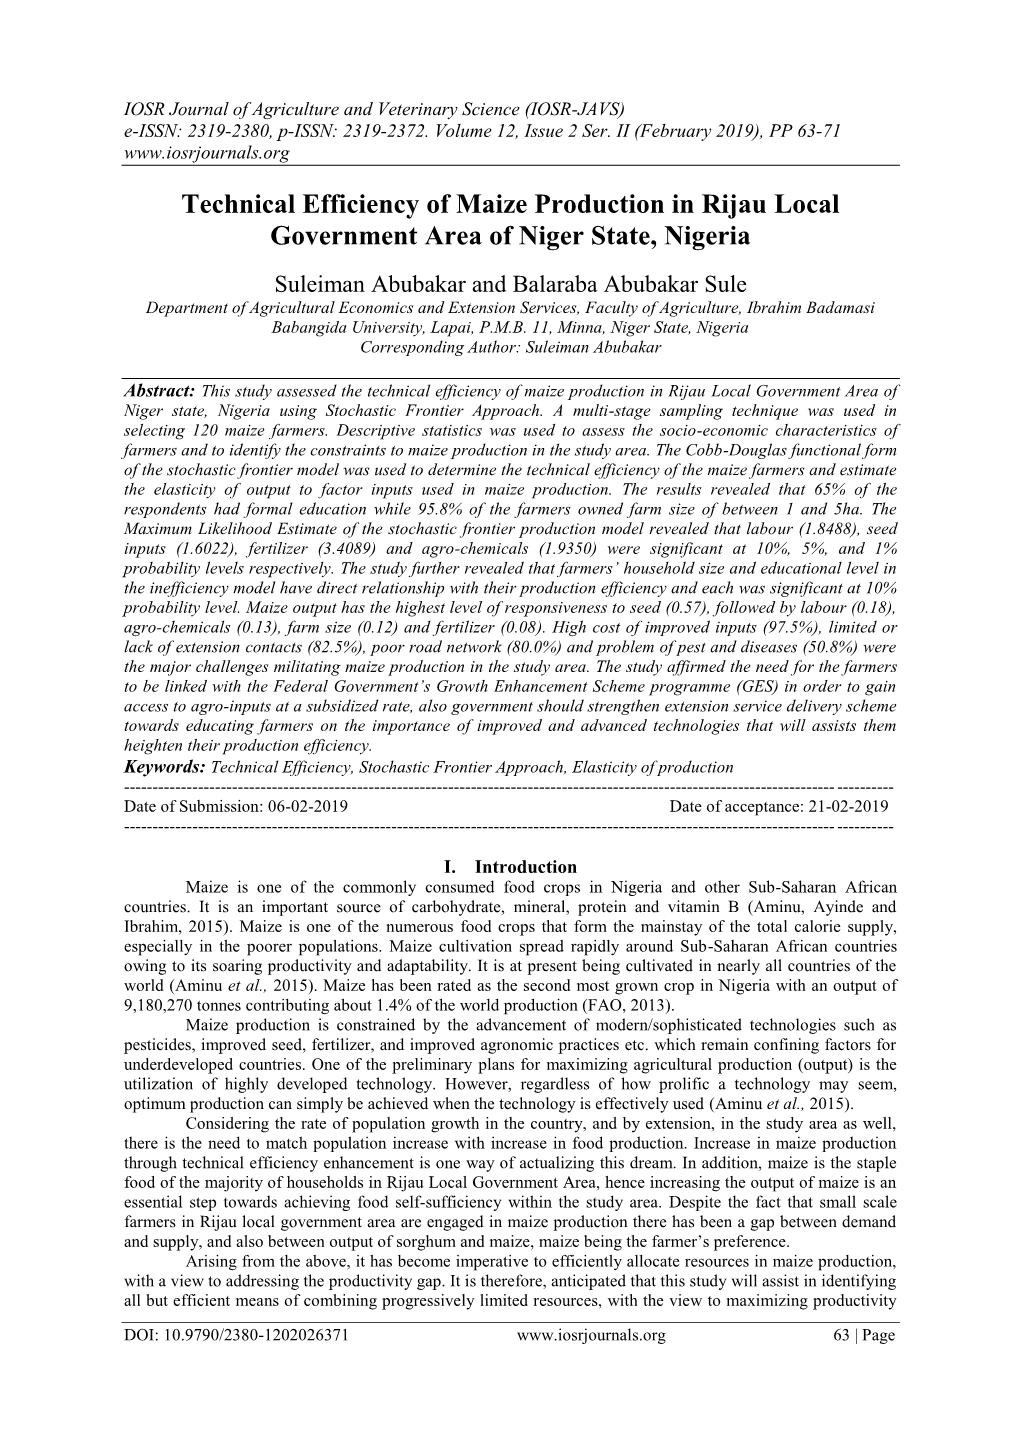 Technical Efficiency of Maize Production in Rijau Local Government Area of Niger State, Nigeria